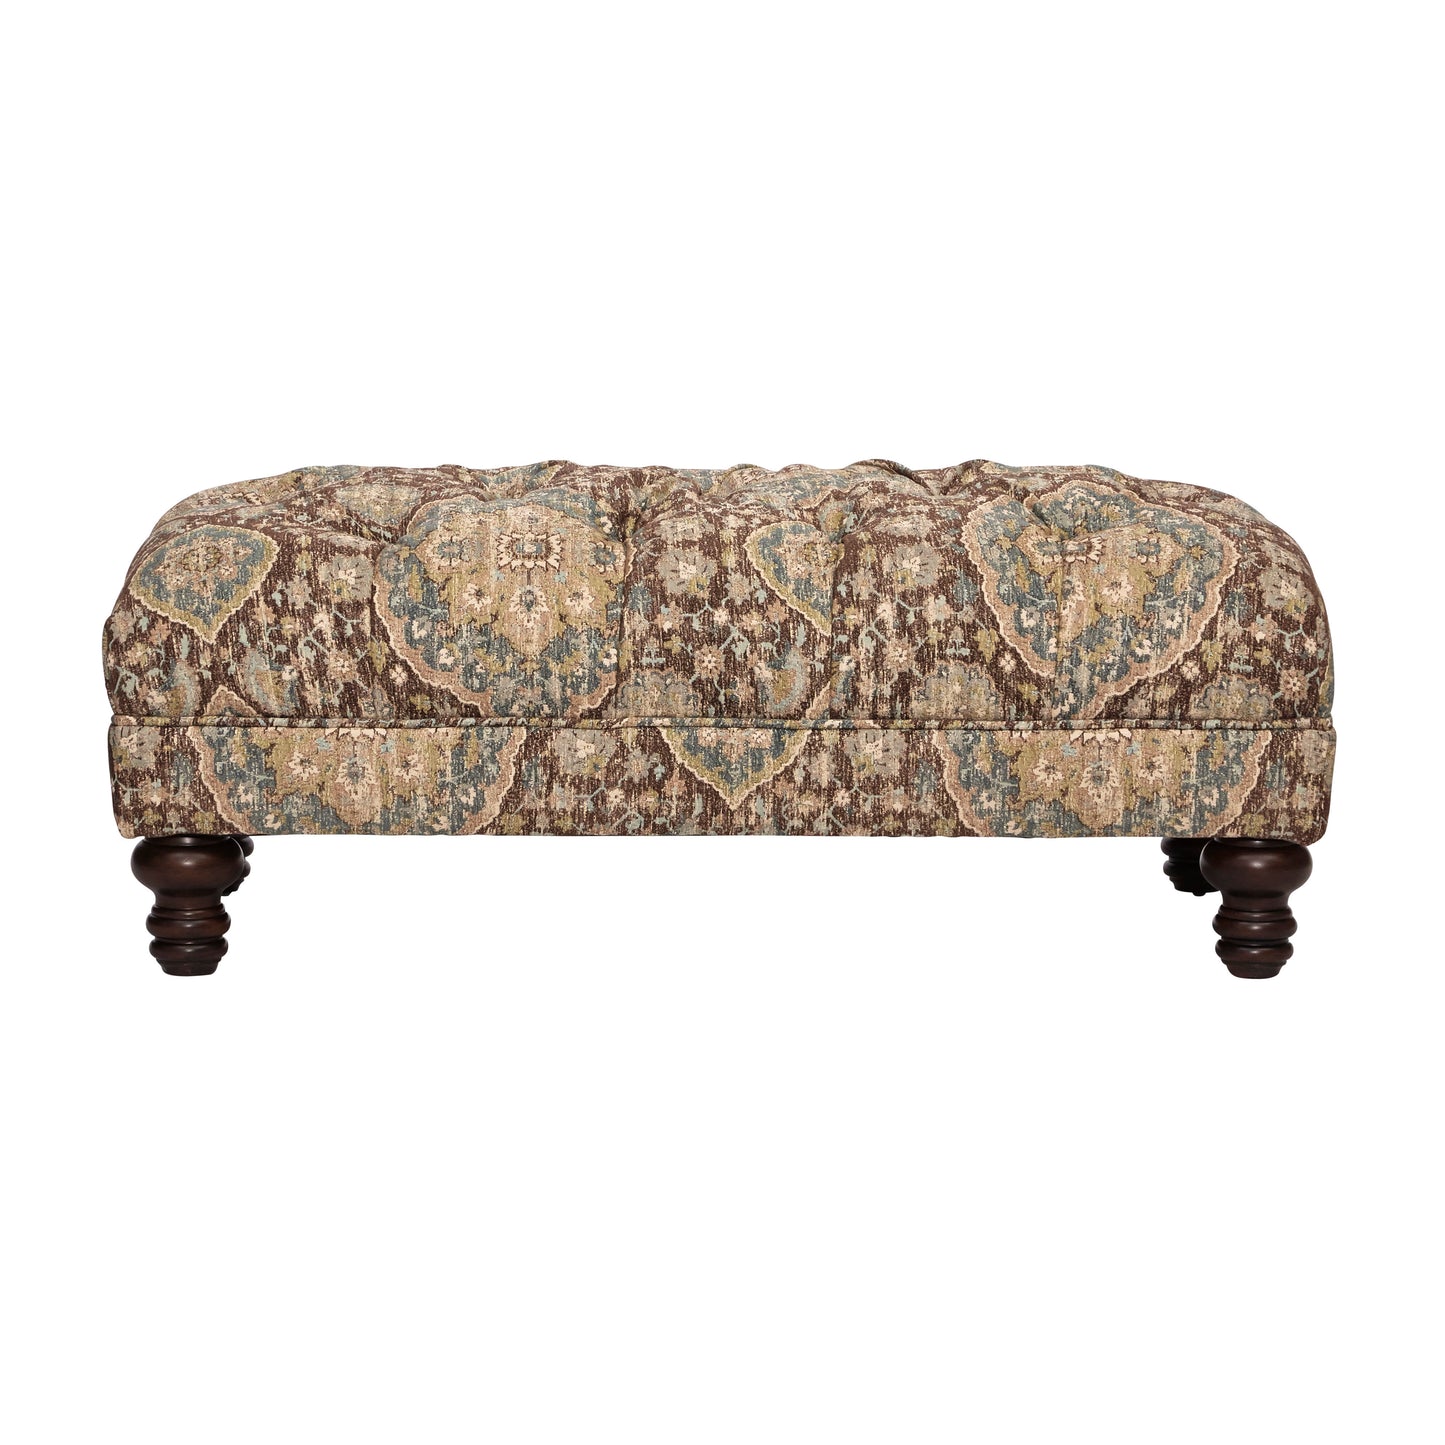 Roundhill Furniture Charbilia Fabric Tufted Cocktail Ottoman in Tapestry Ocean Cliff